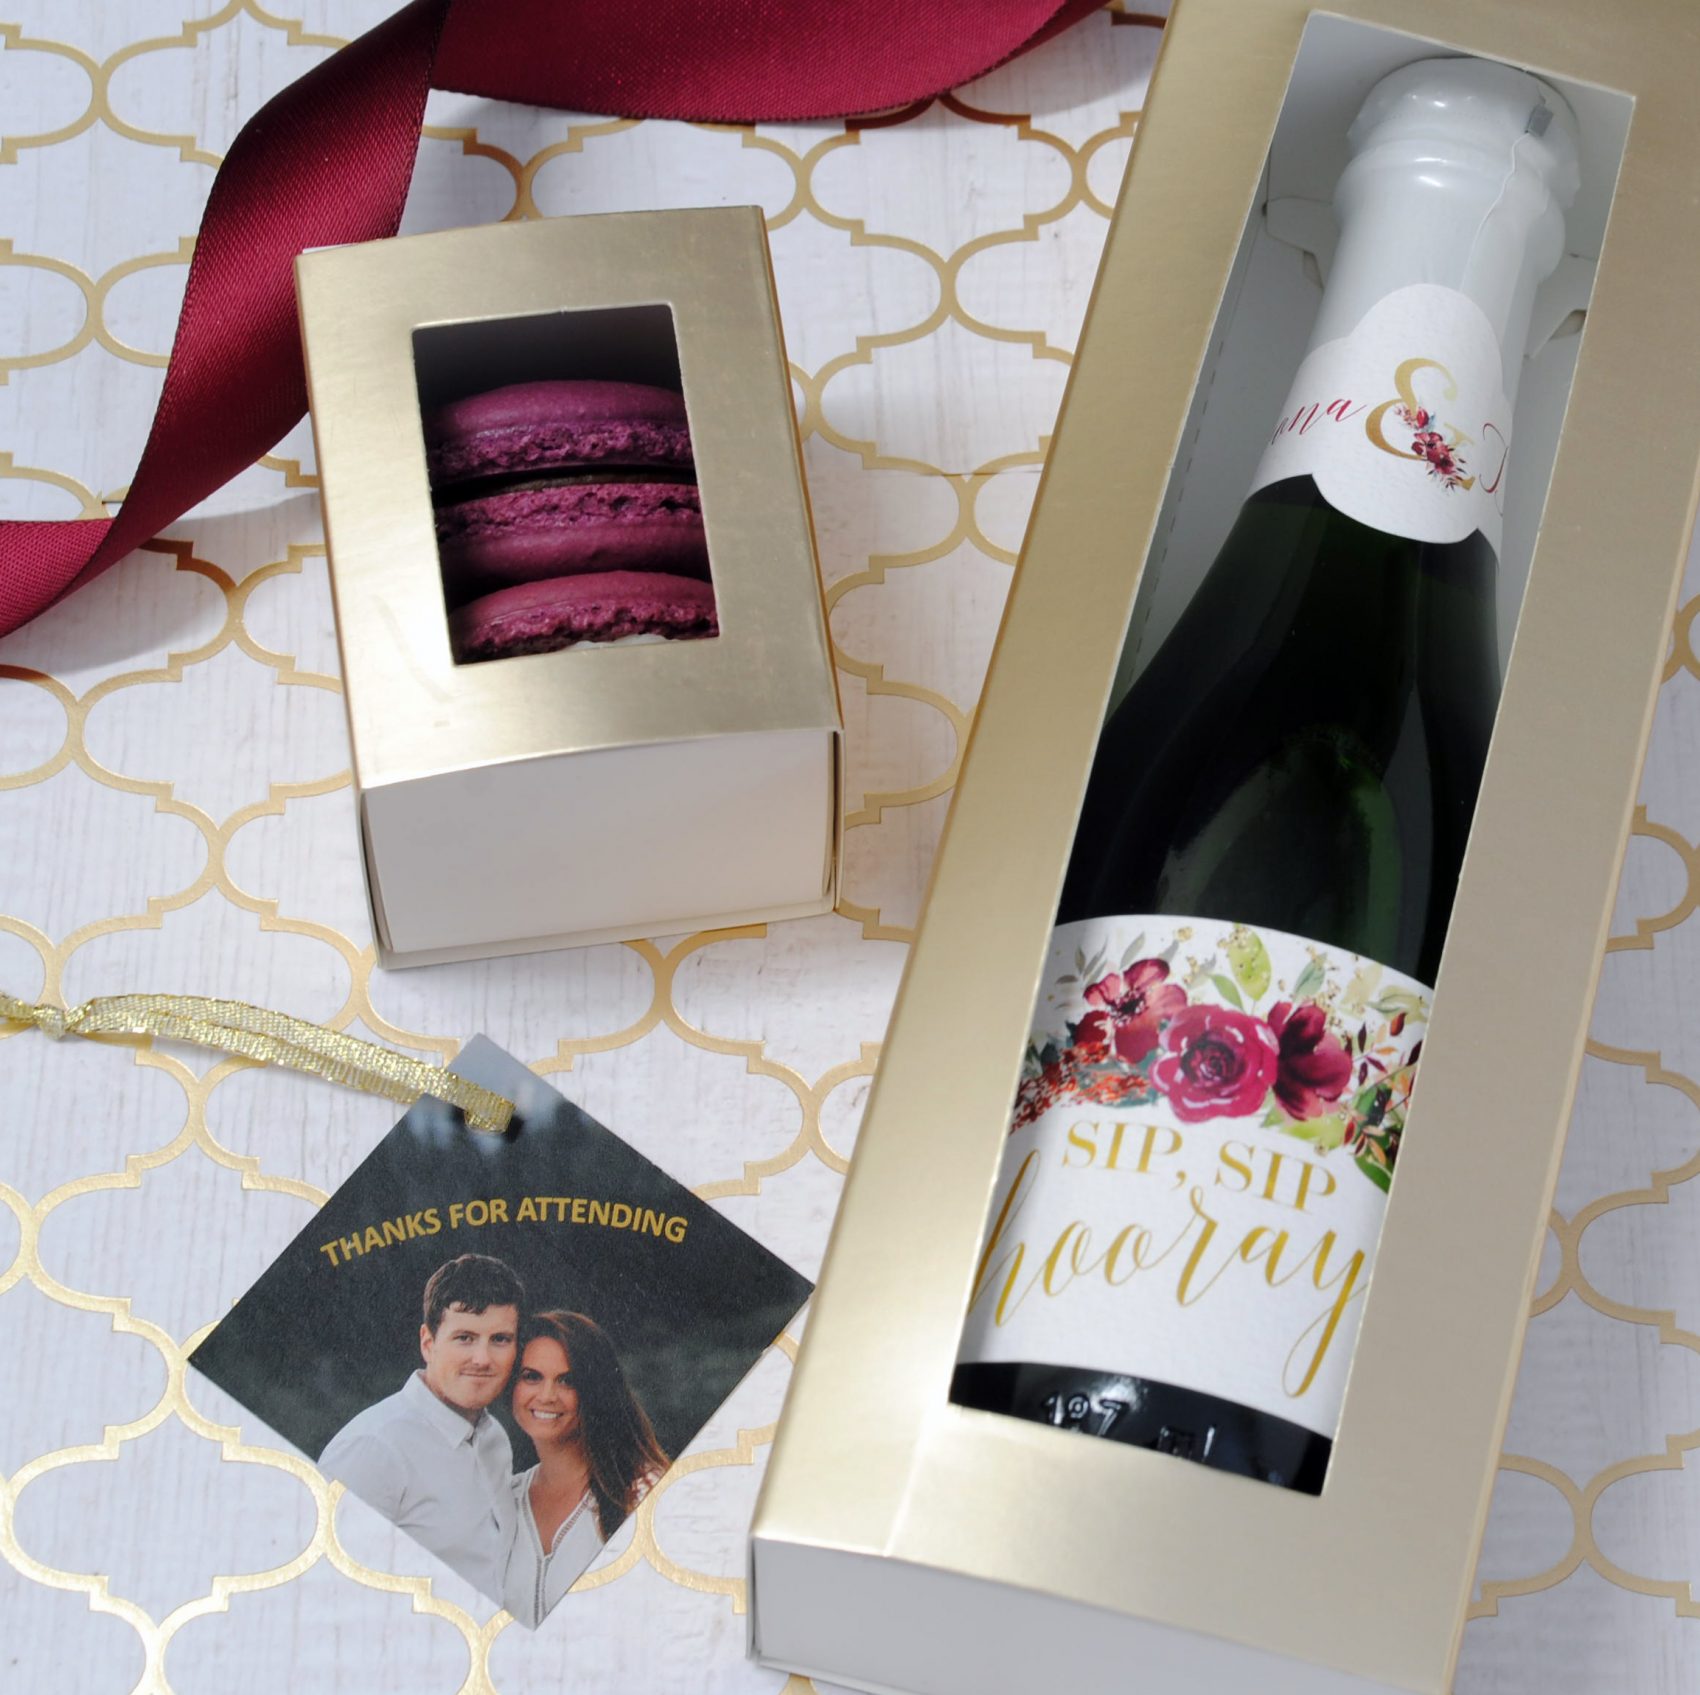 12 DAMASK Personalized GLOSSY Champagne/Wine Bottle labels 4Wedding/party favors 